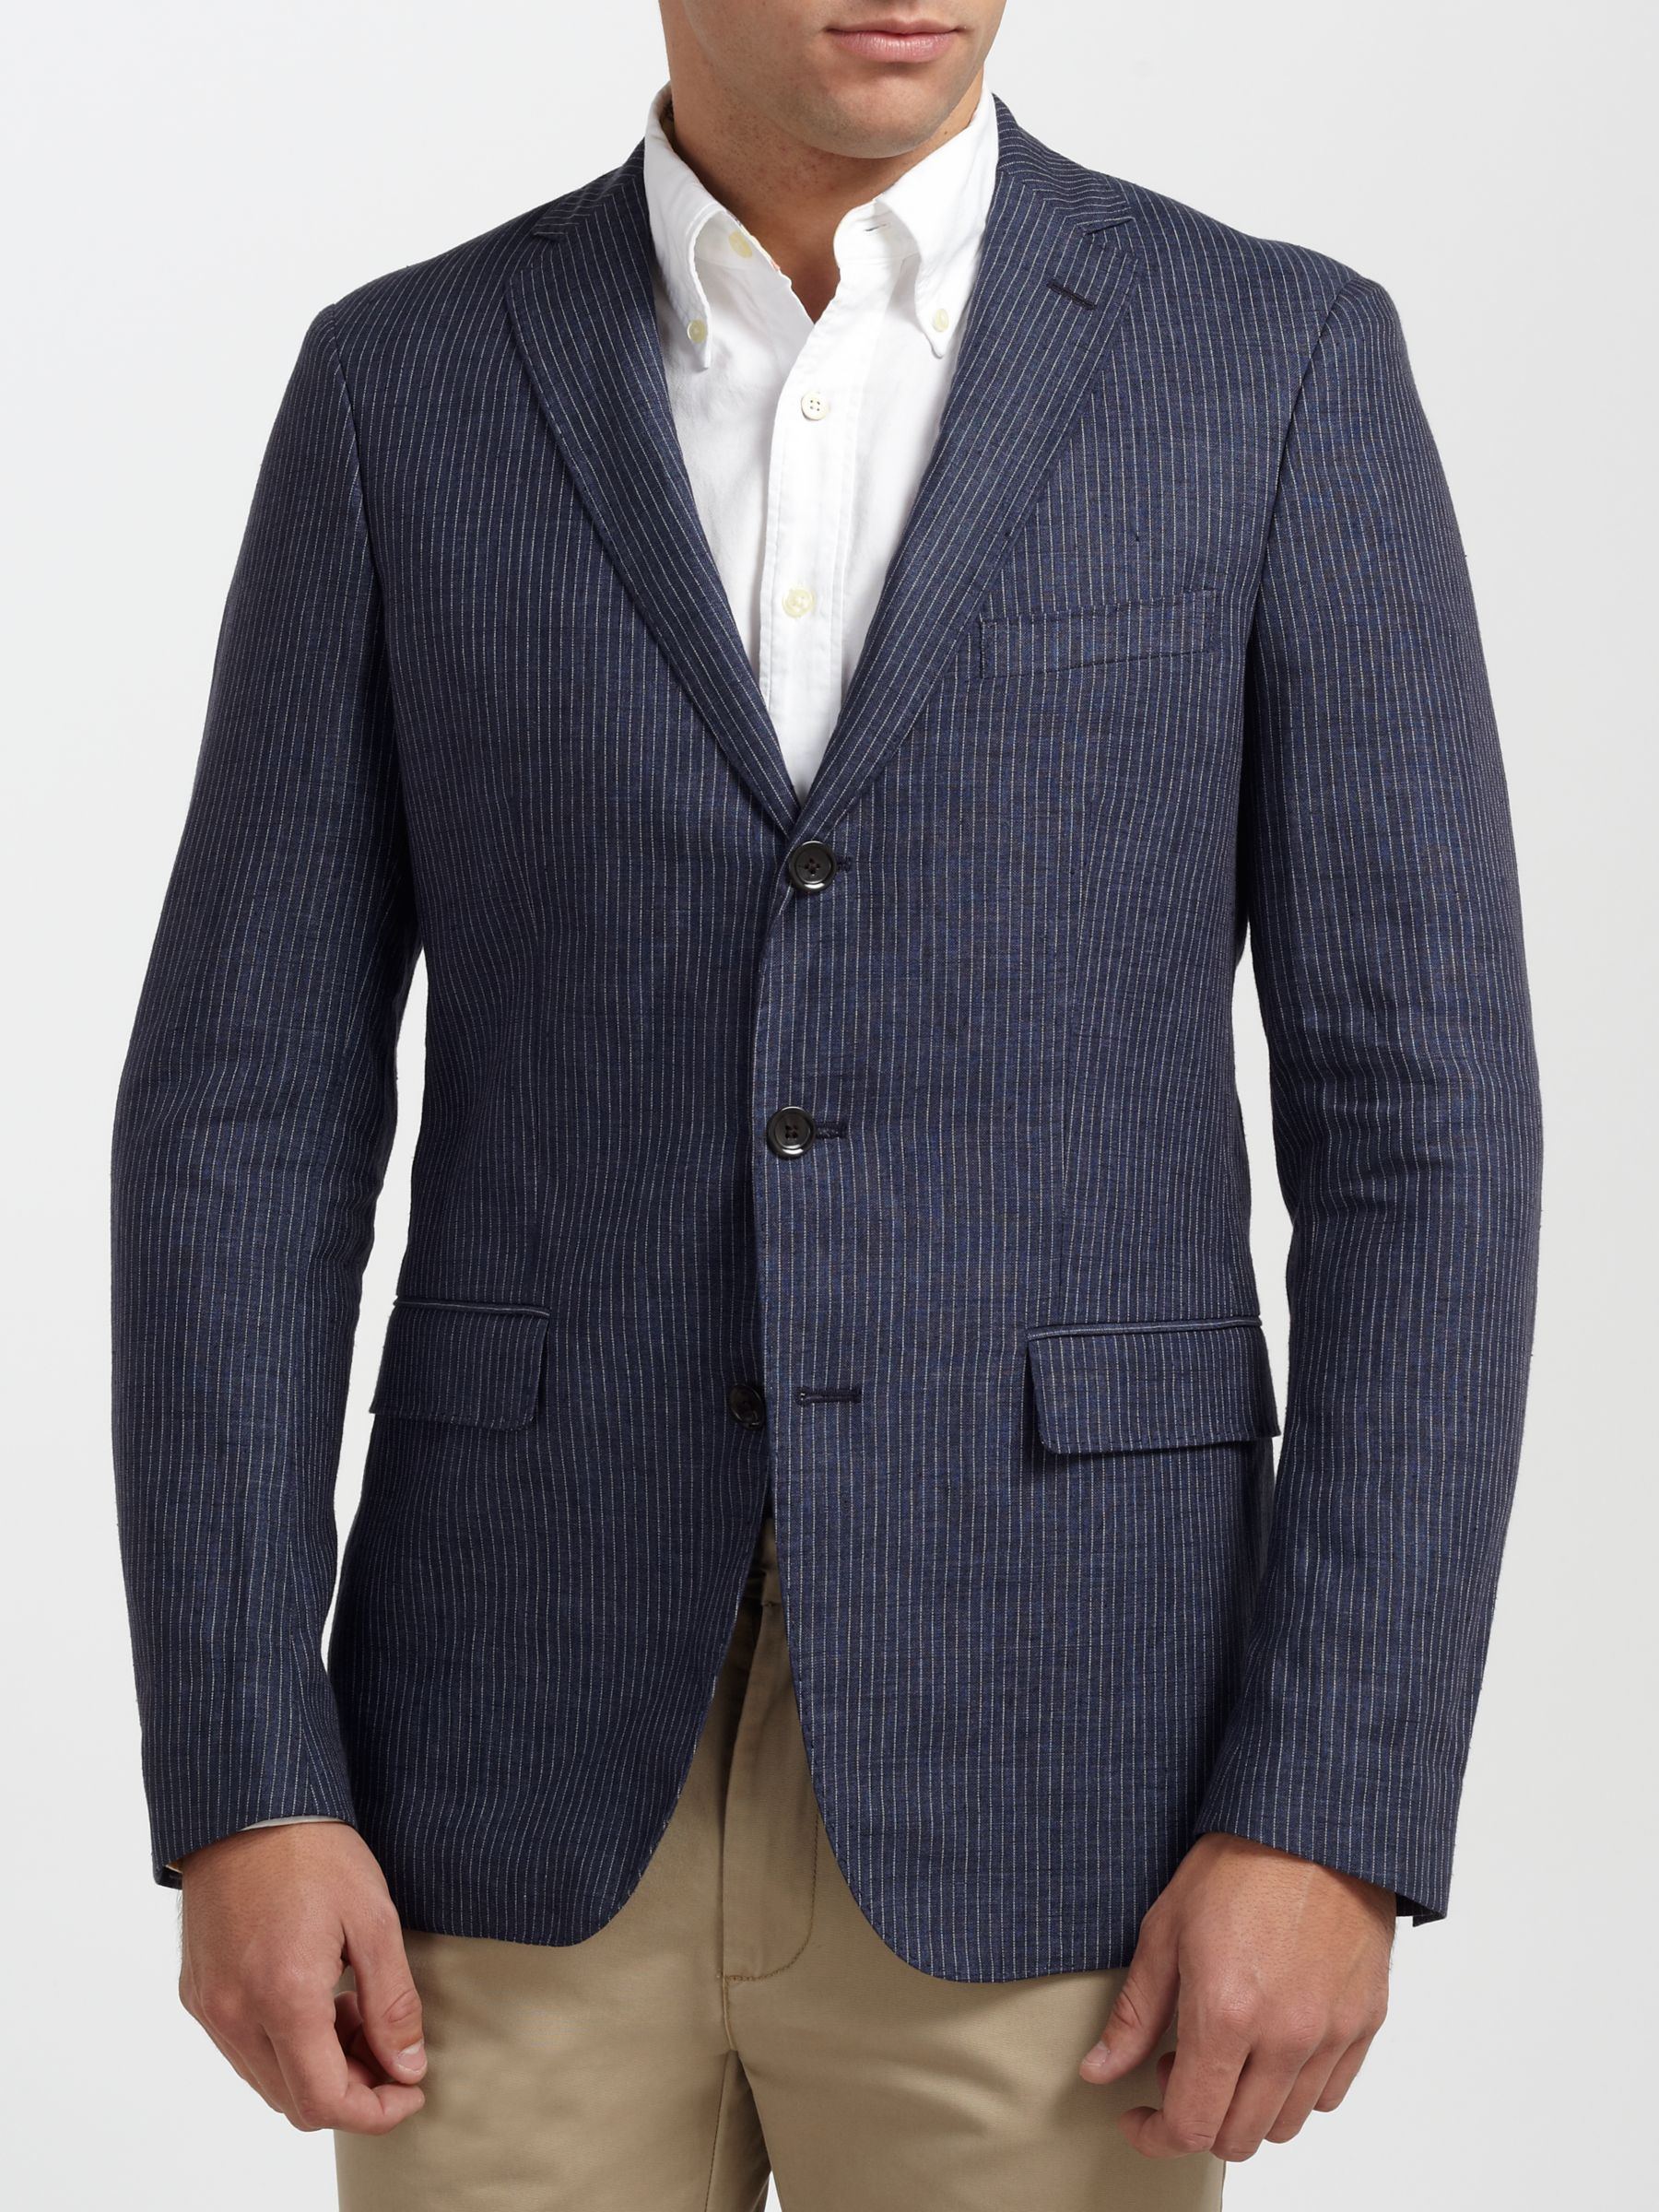 mens blazer with elbow patches uk